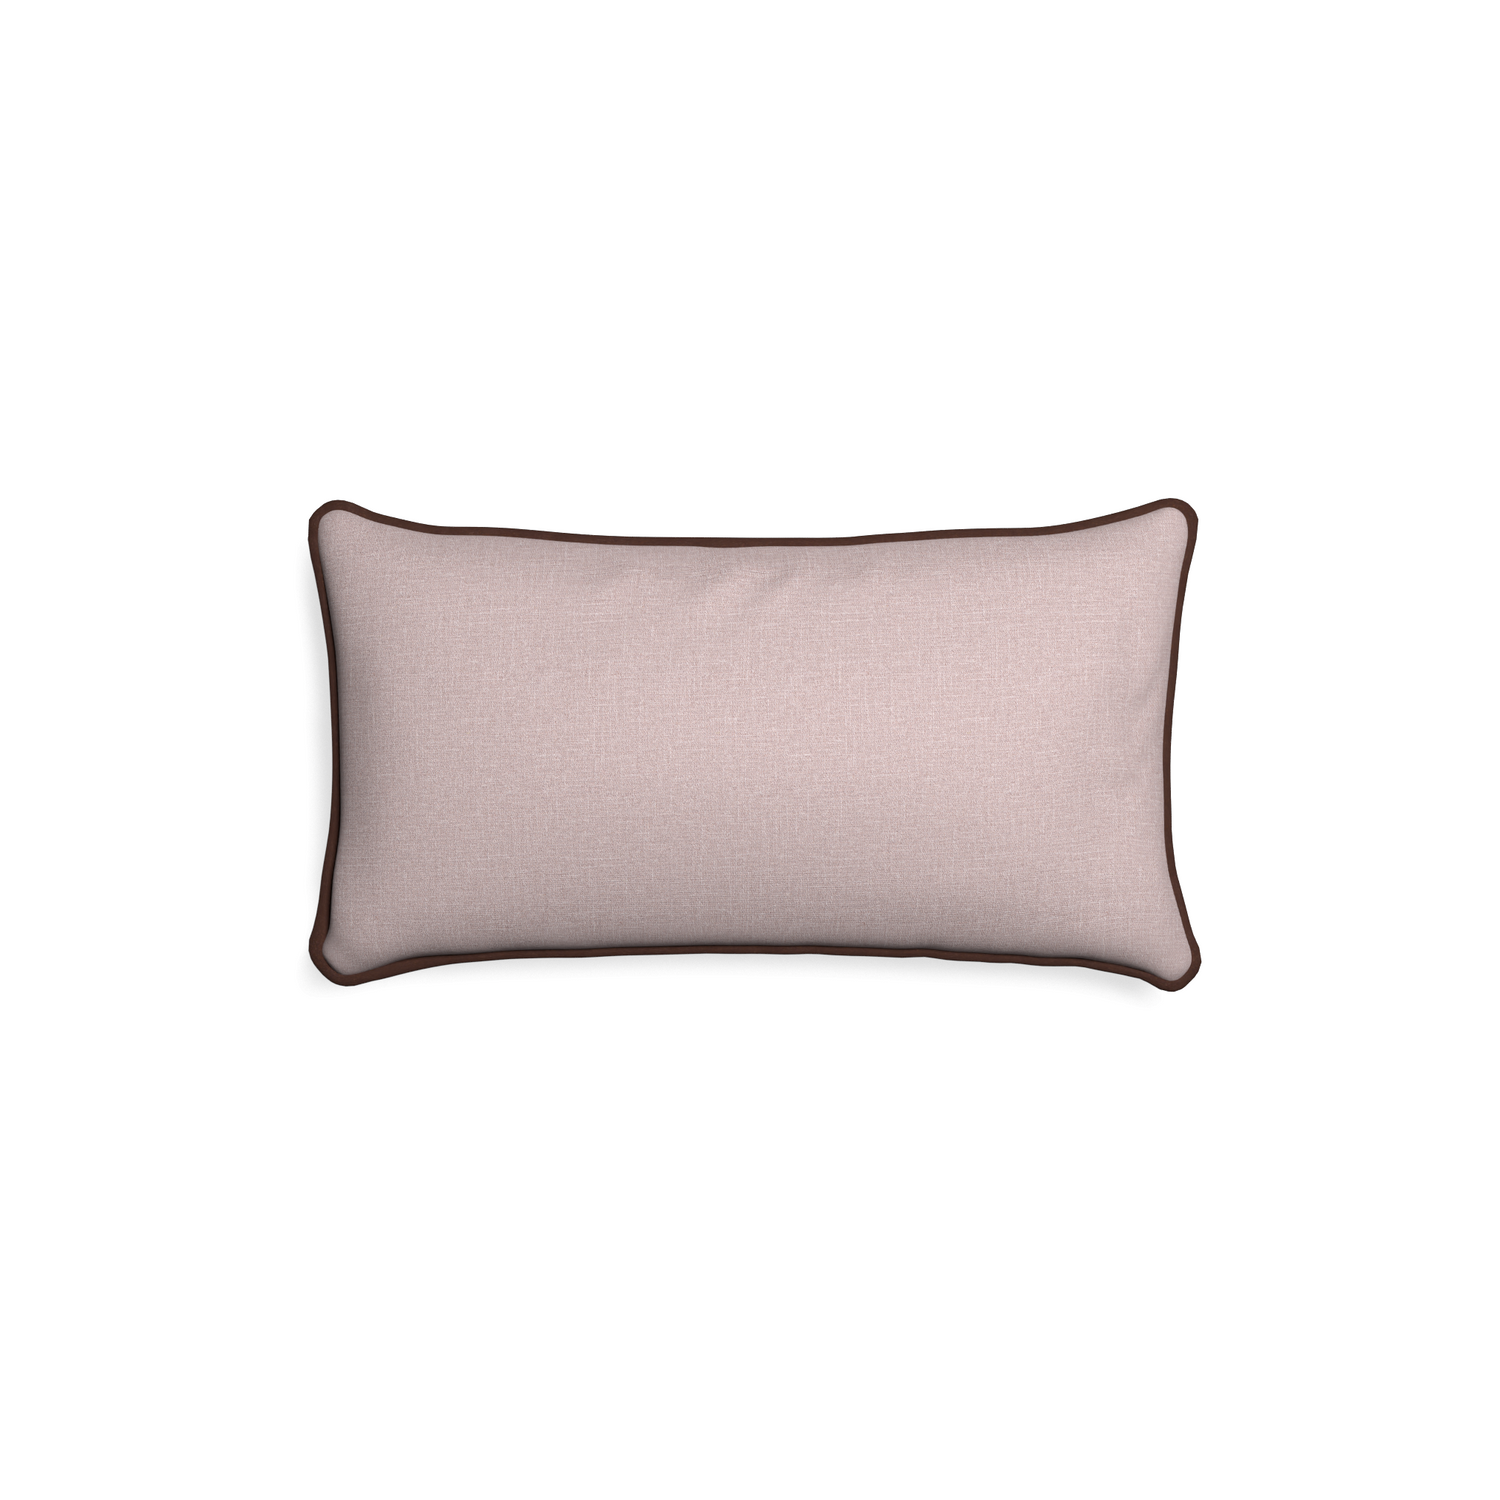 Petite-lumbar orchid custom mauve pinkpillow with w piping on white background